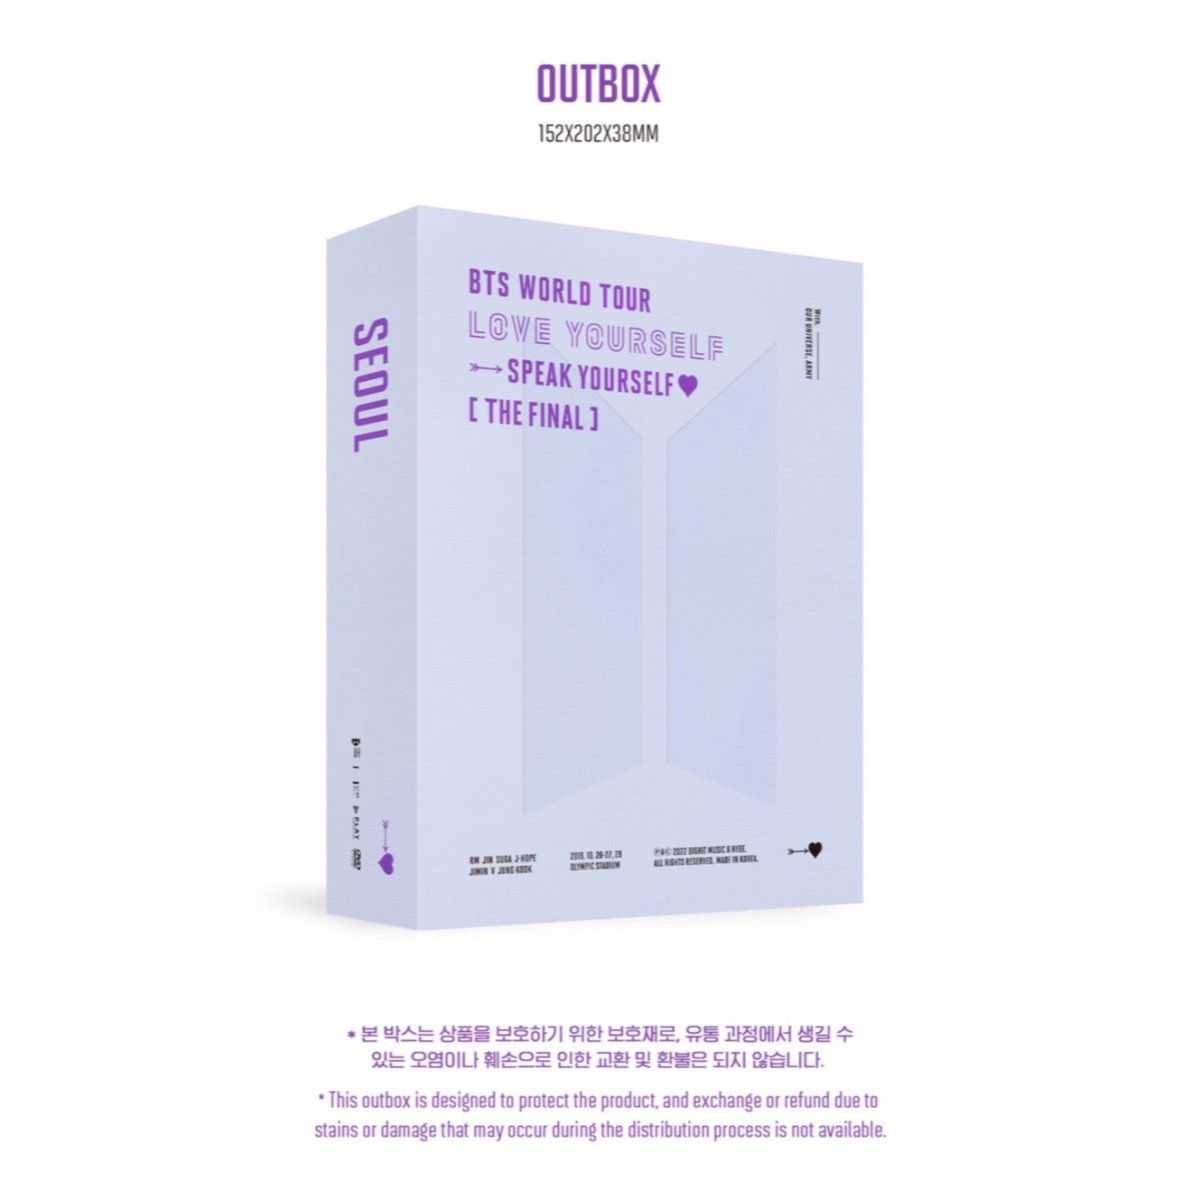 BTS OFFICIAL World Tour Love Yourself: SPEAK YOURSELF THE FINAL DVD